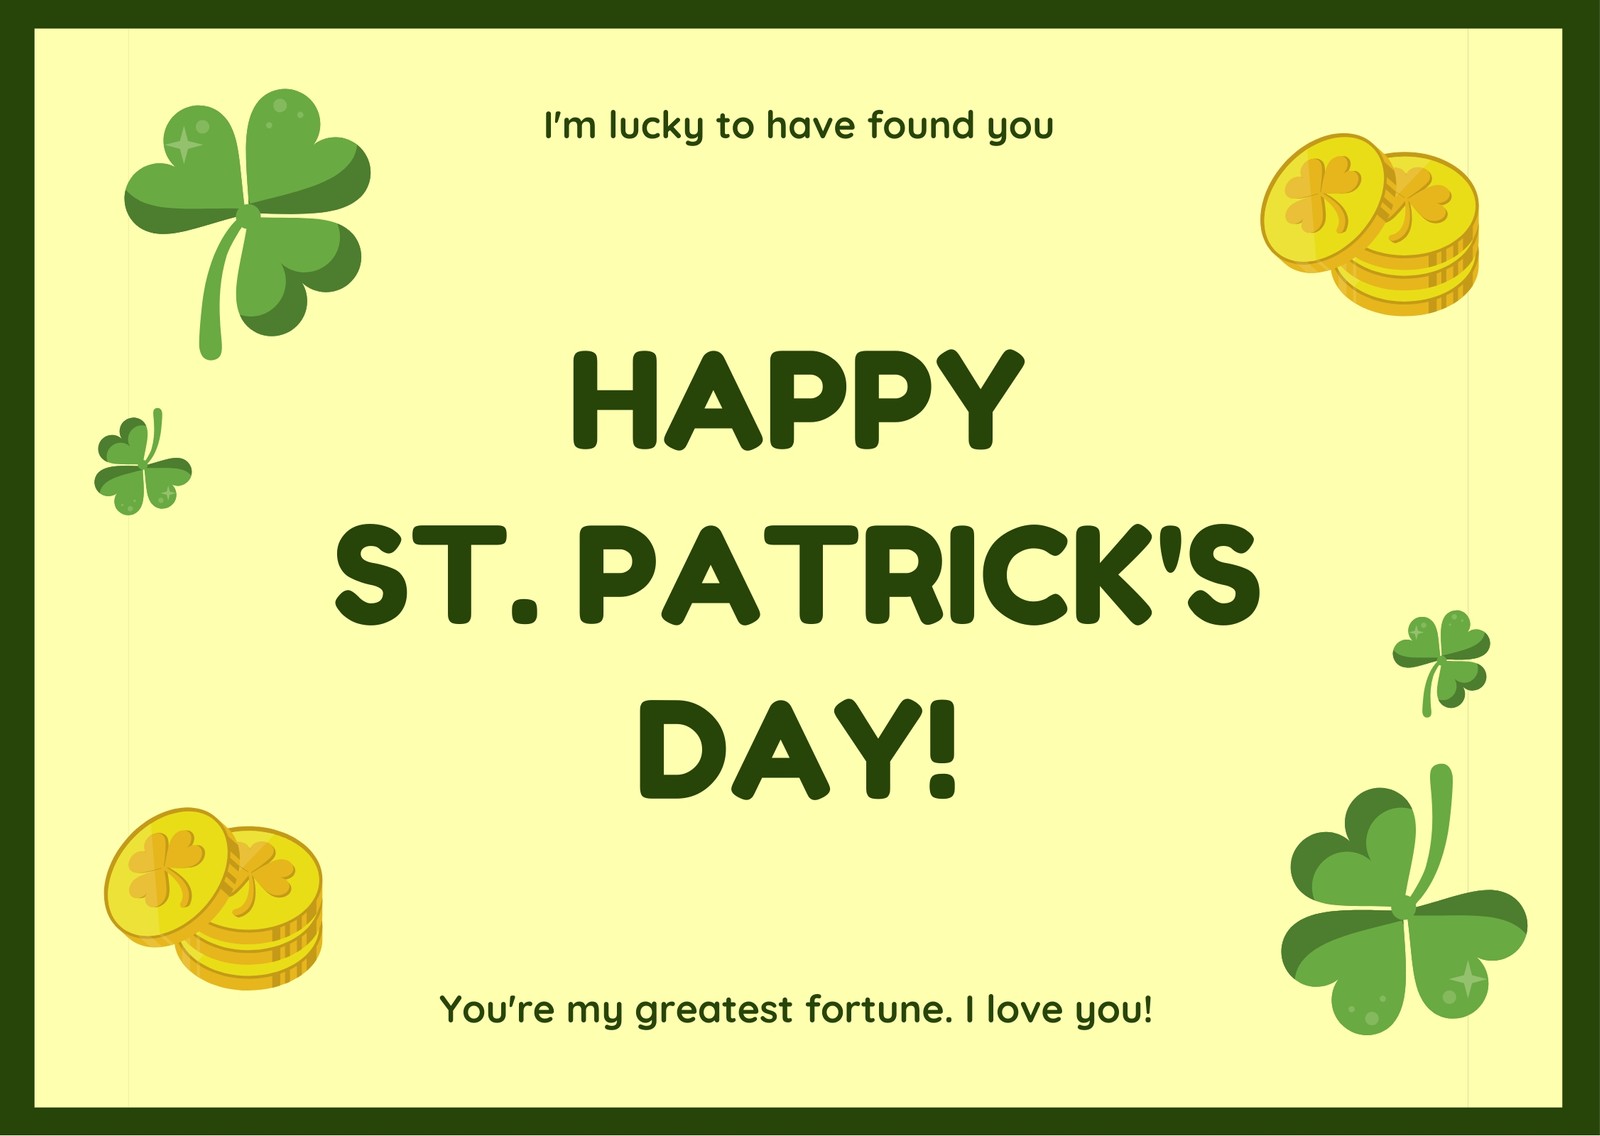 St Patrick's Day Lotto Tickets DIY Editable Template Personalize With Canva  Happy St Patrick's Day Lottery Scratch Ticket Holder 